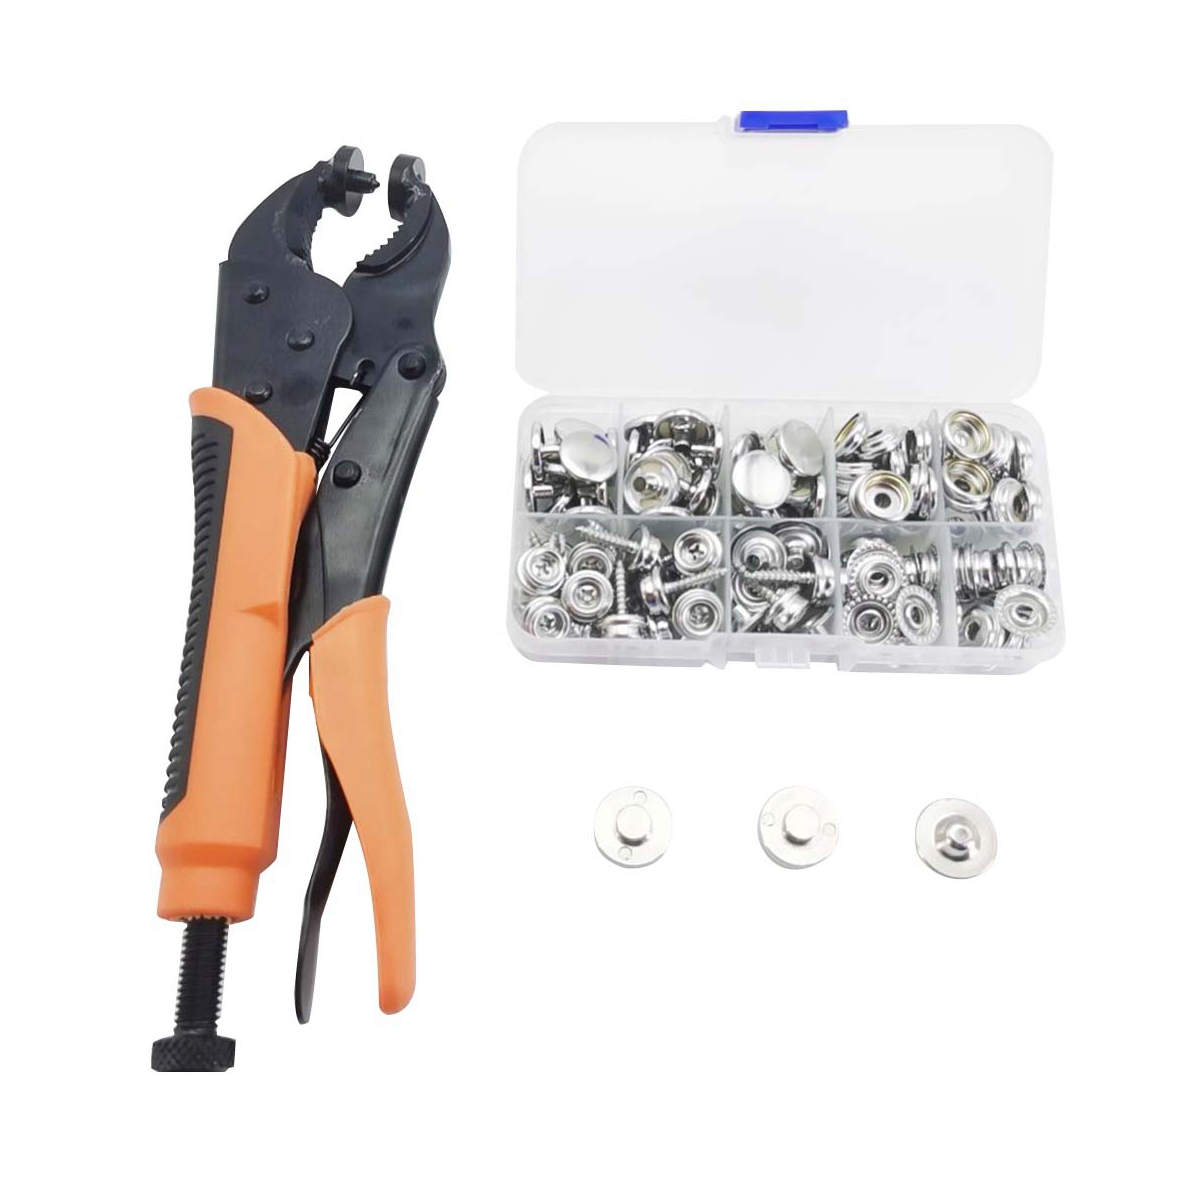 Snap Fastener Kit Adjustable Pliers For Snap Buttons,snap Fastener